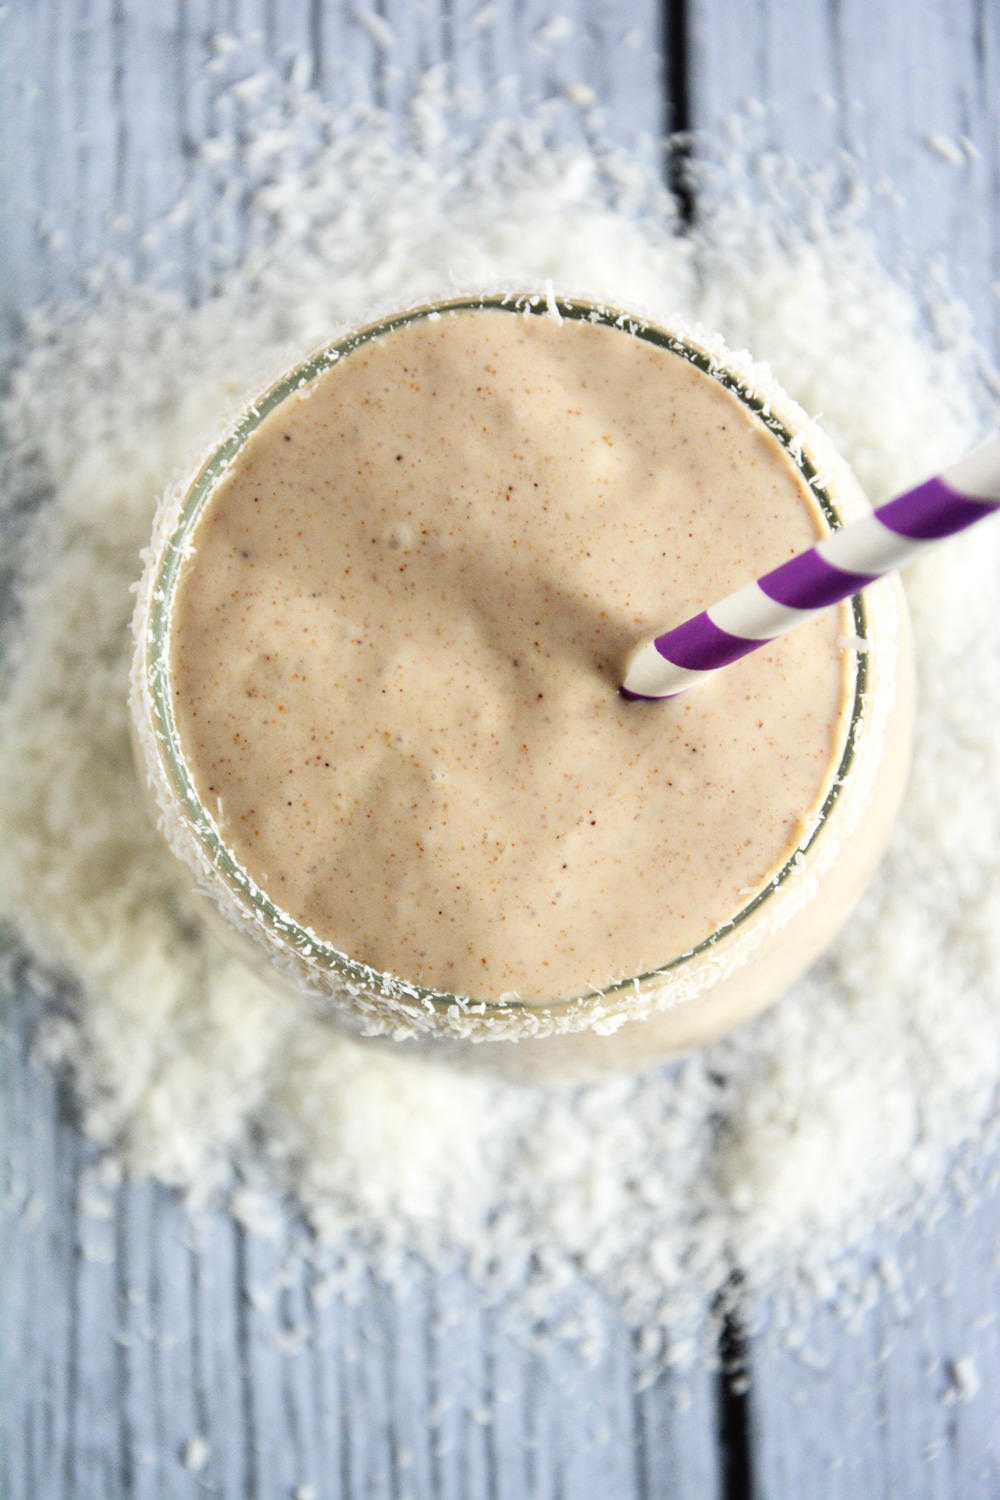 Coconut, Vanilla & Almond Butter Smoothie is a velvety smoothie made with coconut milk, vanilla, almond butter and sweetened with dates!